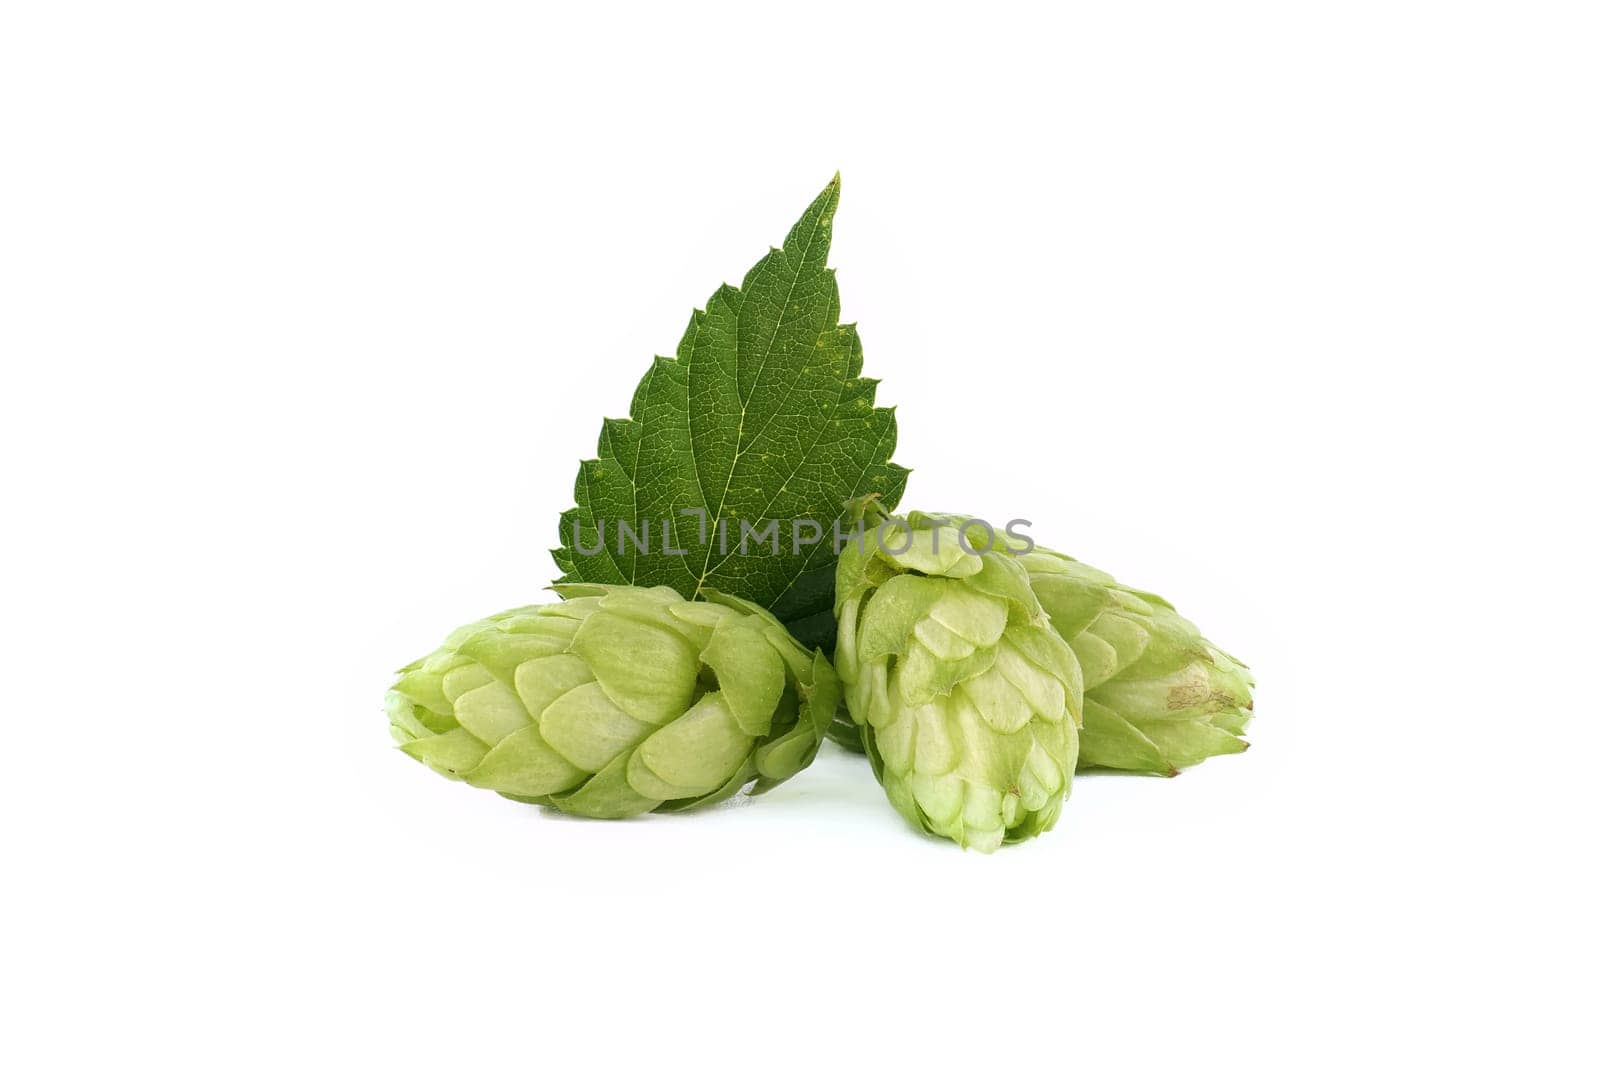 Hops seed cones or strobiles isolated on white by NetPix